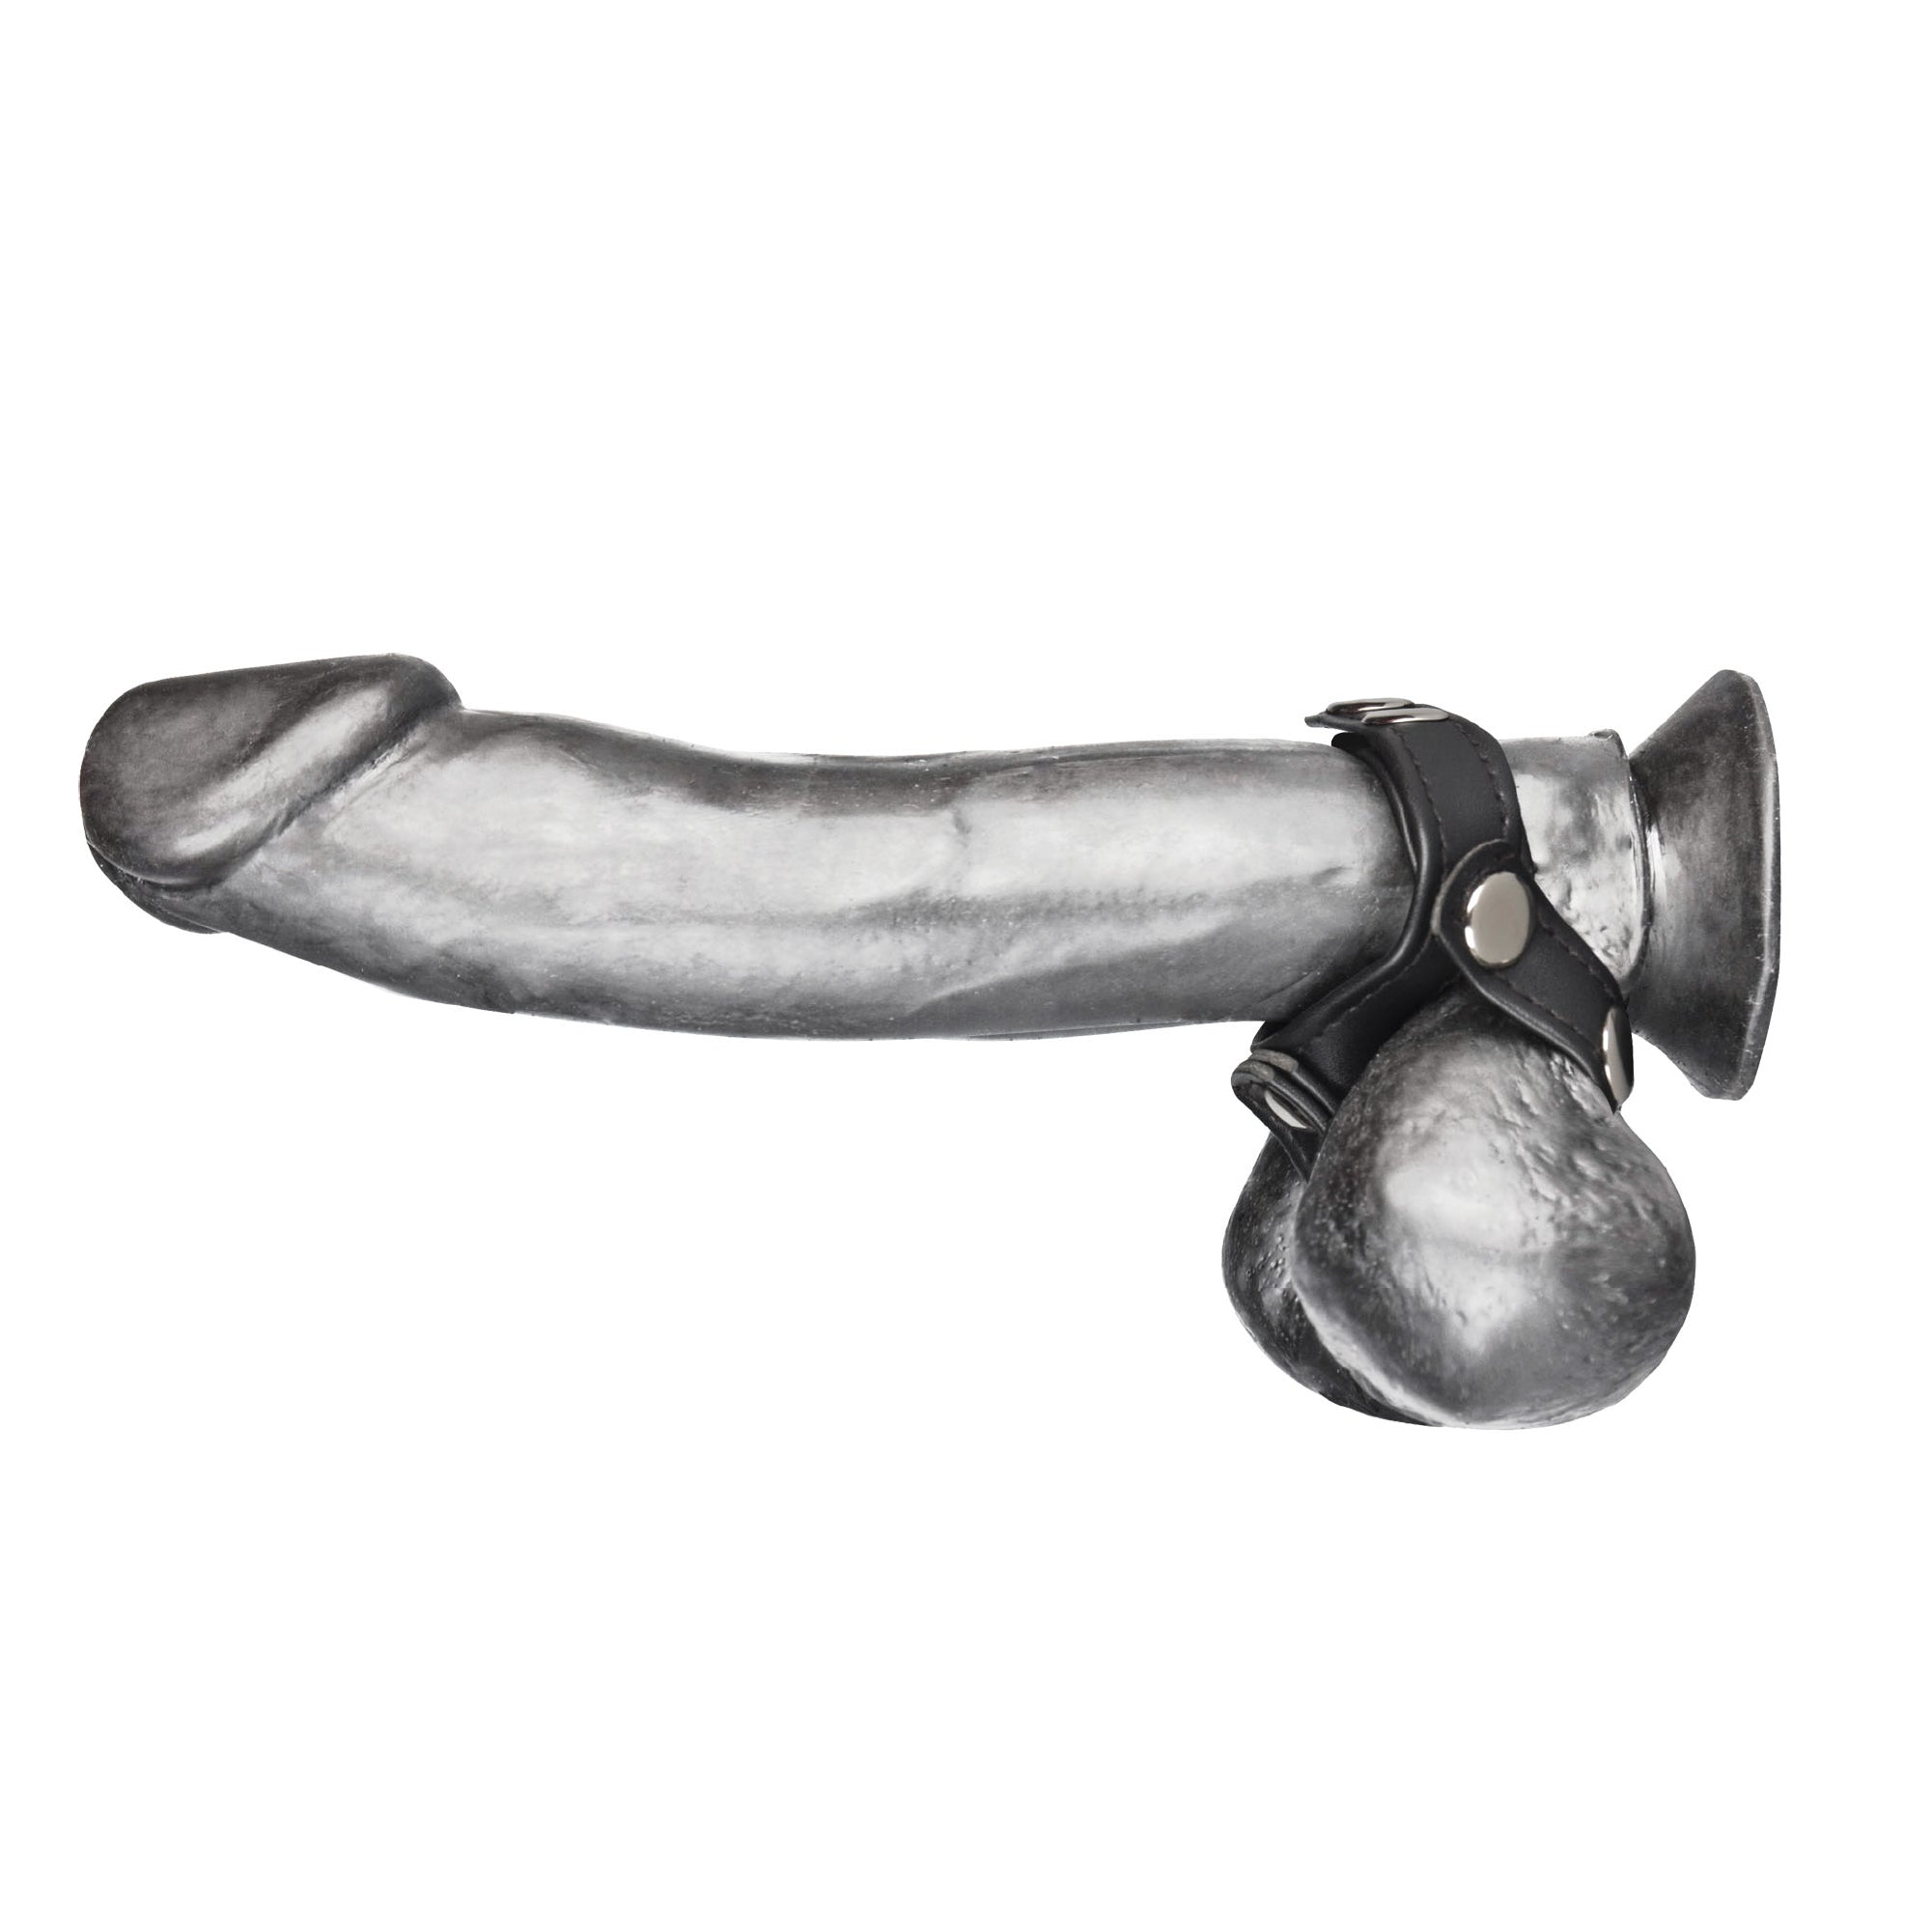 V-style cock ring with ball divider